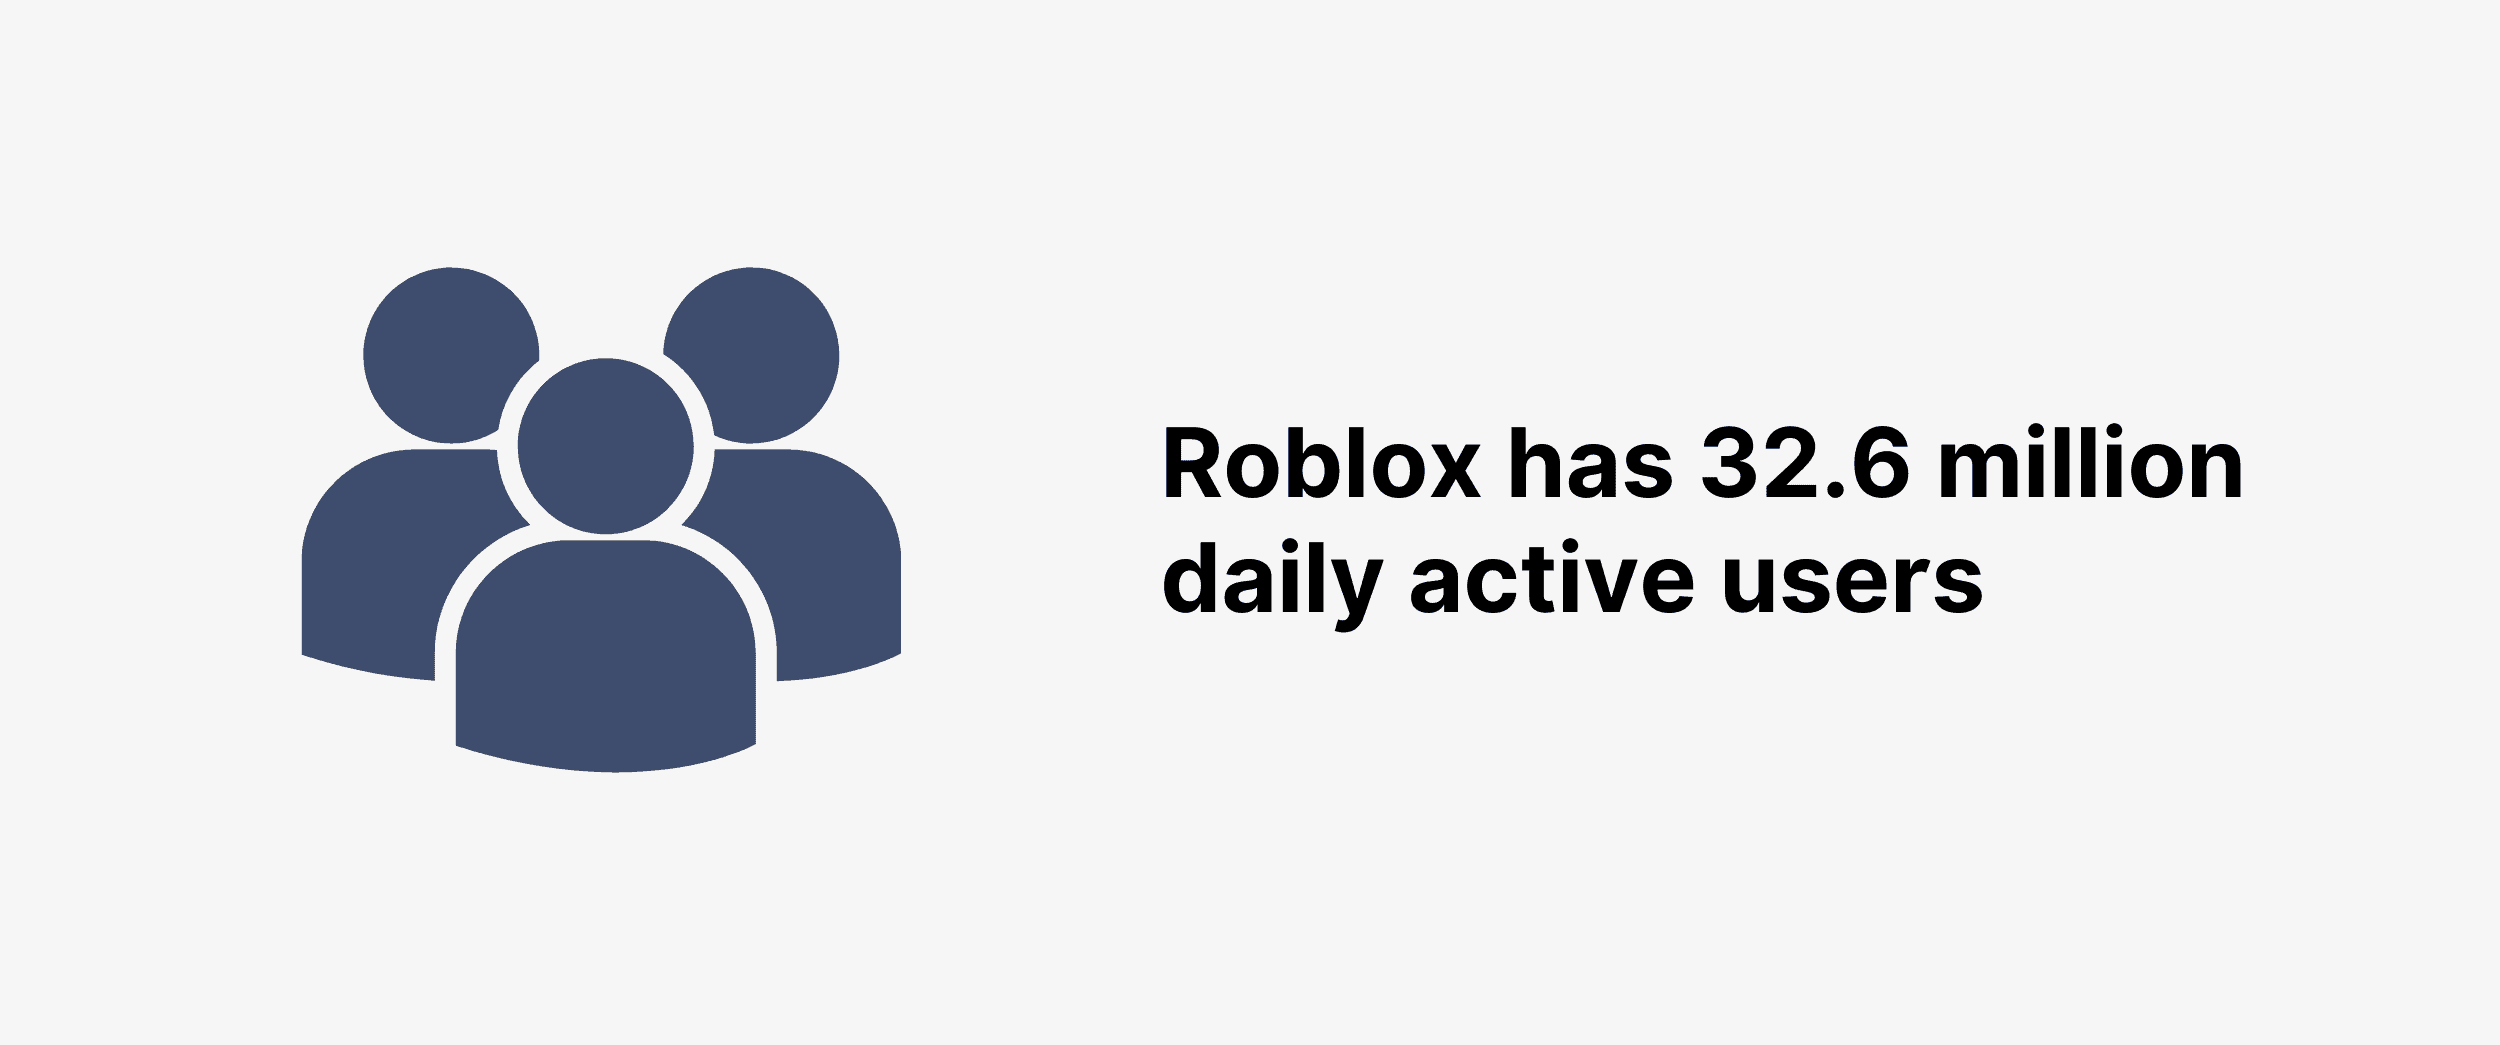 Roblox has 32.6 million daily active users